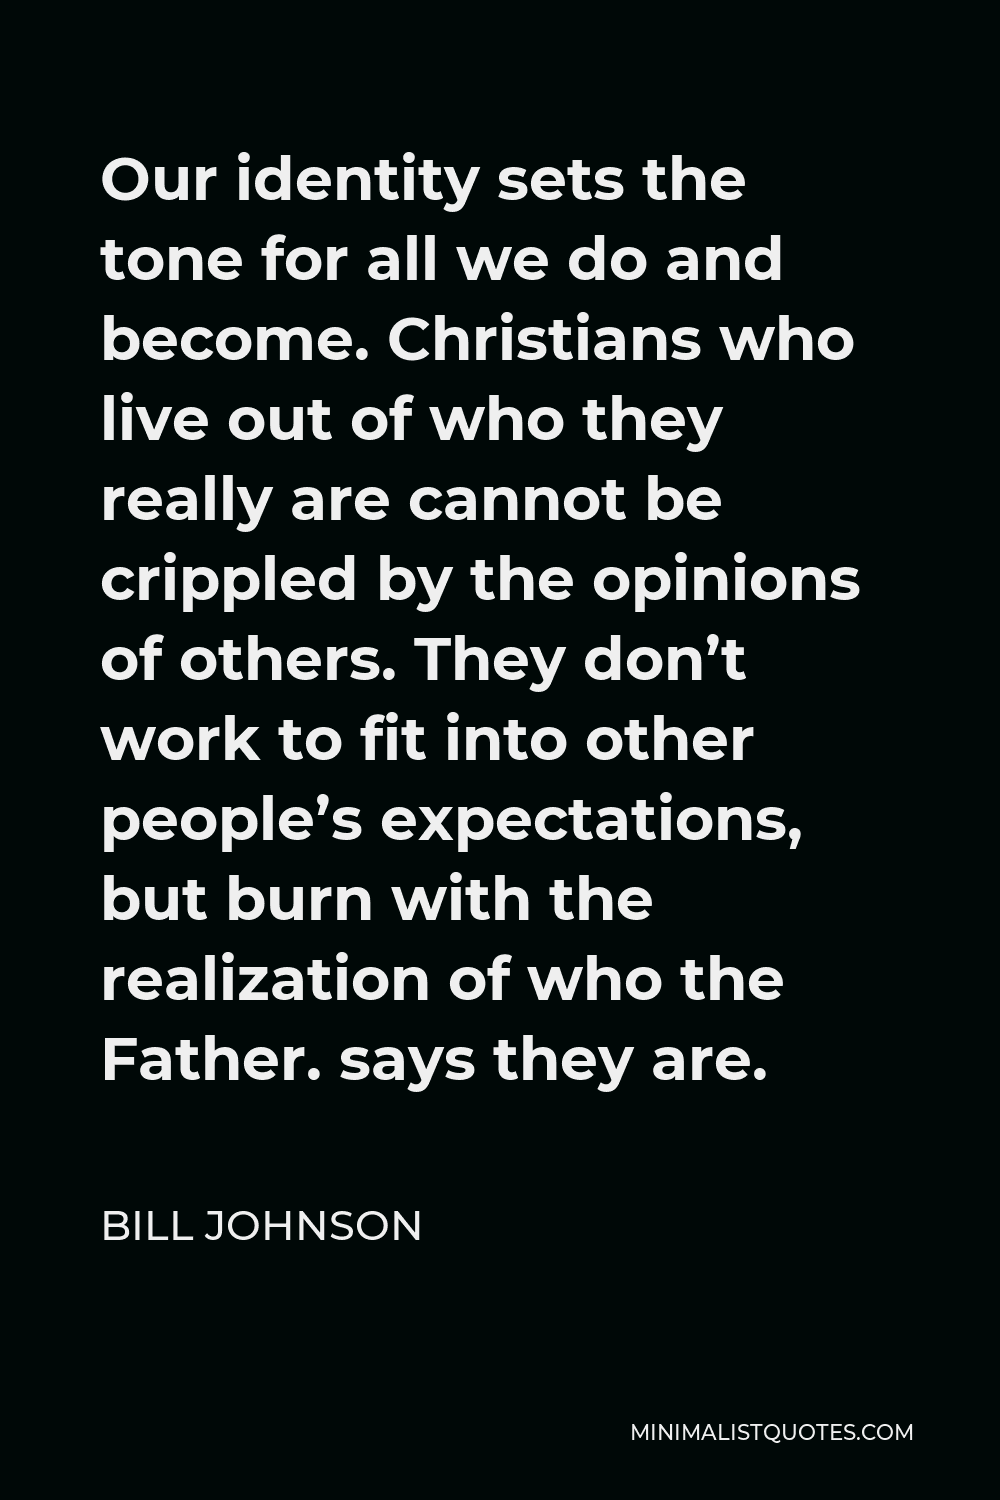 Bill Johnson Quote - Our identity sets the tone for all we do and become. Christians who live out of who they really are cannot be crippled by the opinions of others. They don’t work to fit into other people’s expectations, but burn with the realization of who the Father. says they are.